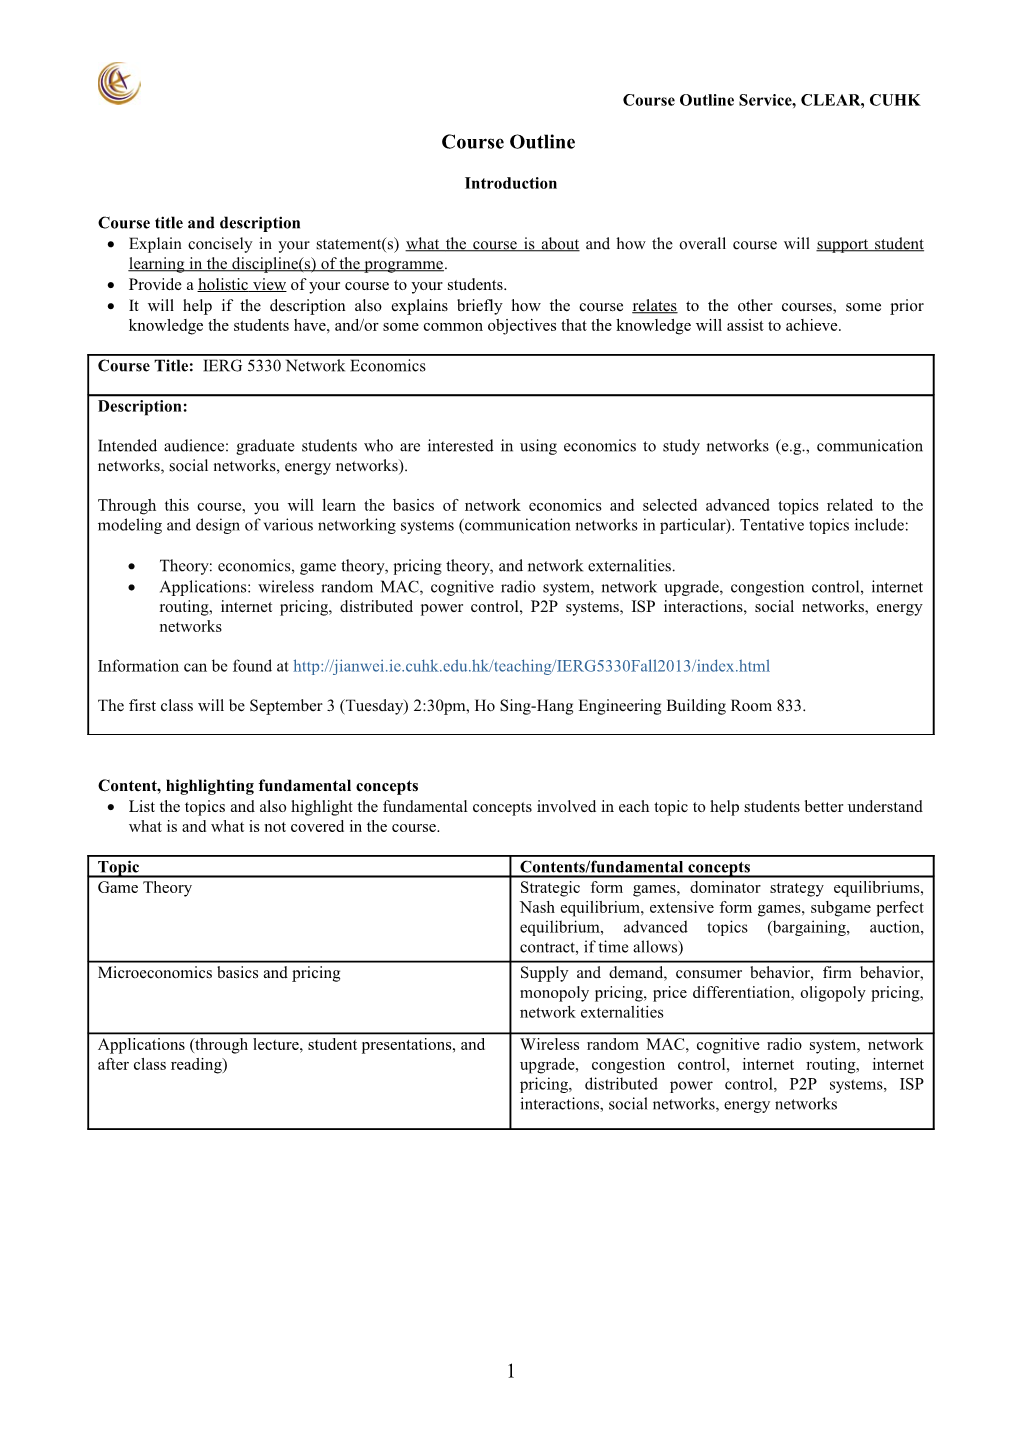 Course Outline Template s3